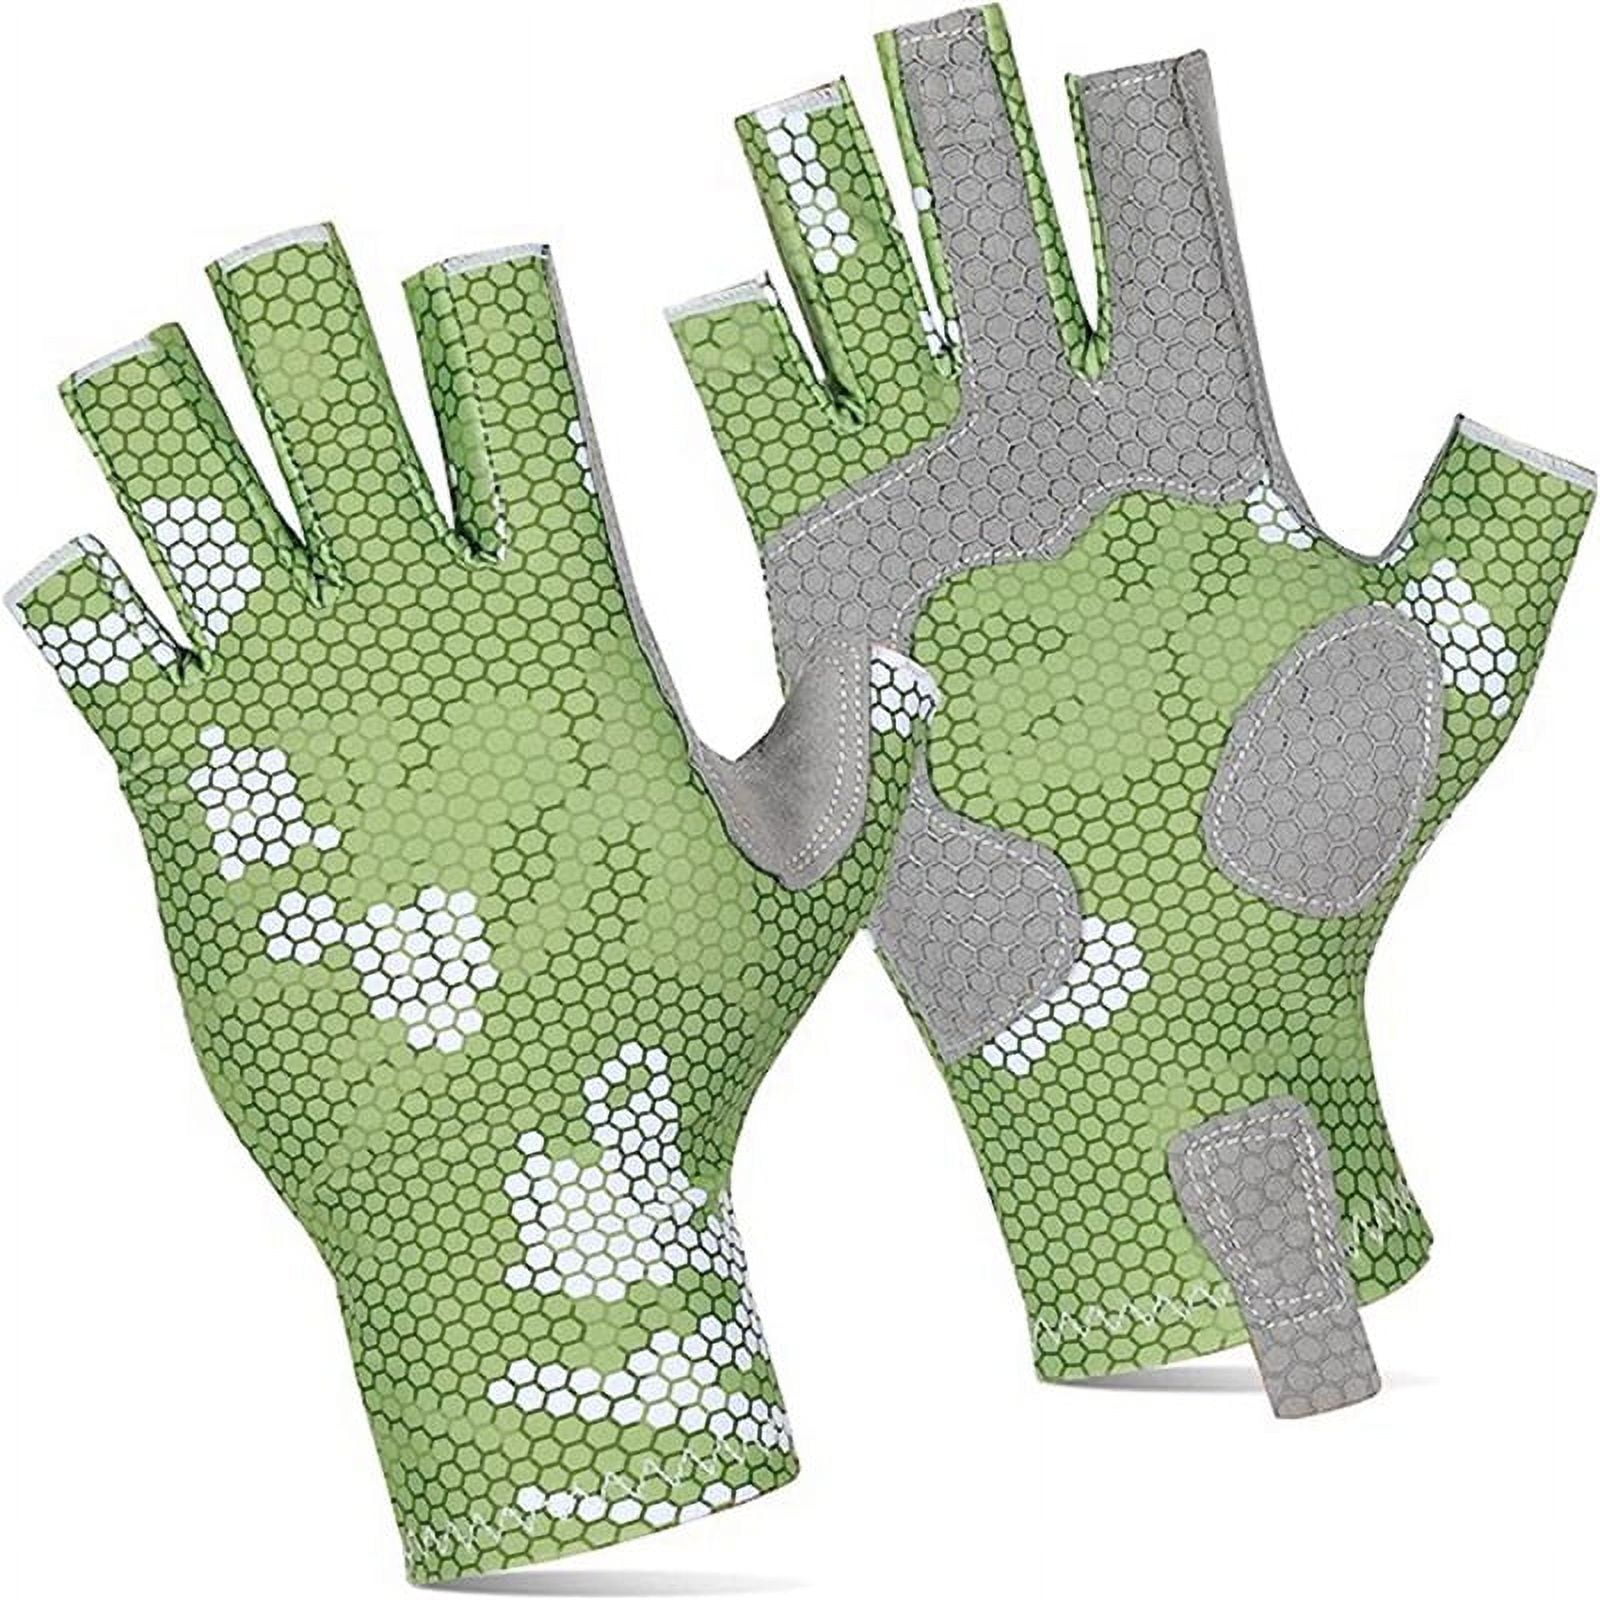 Fishing Gloves with Silicone Anti- Design - Comfortable